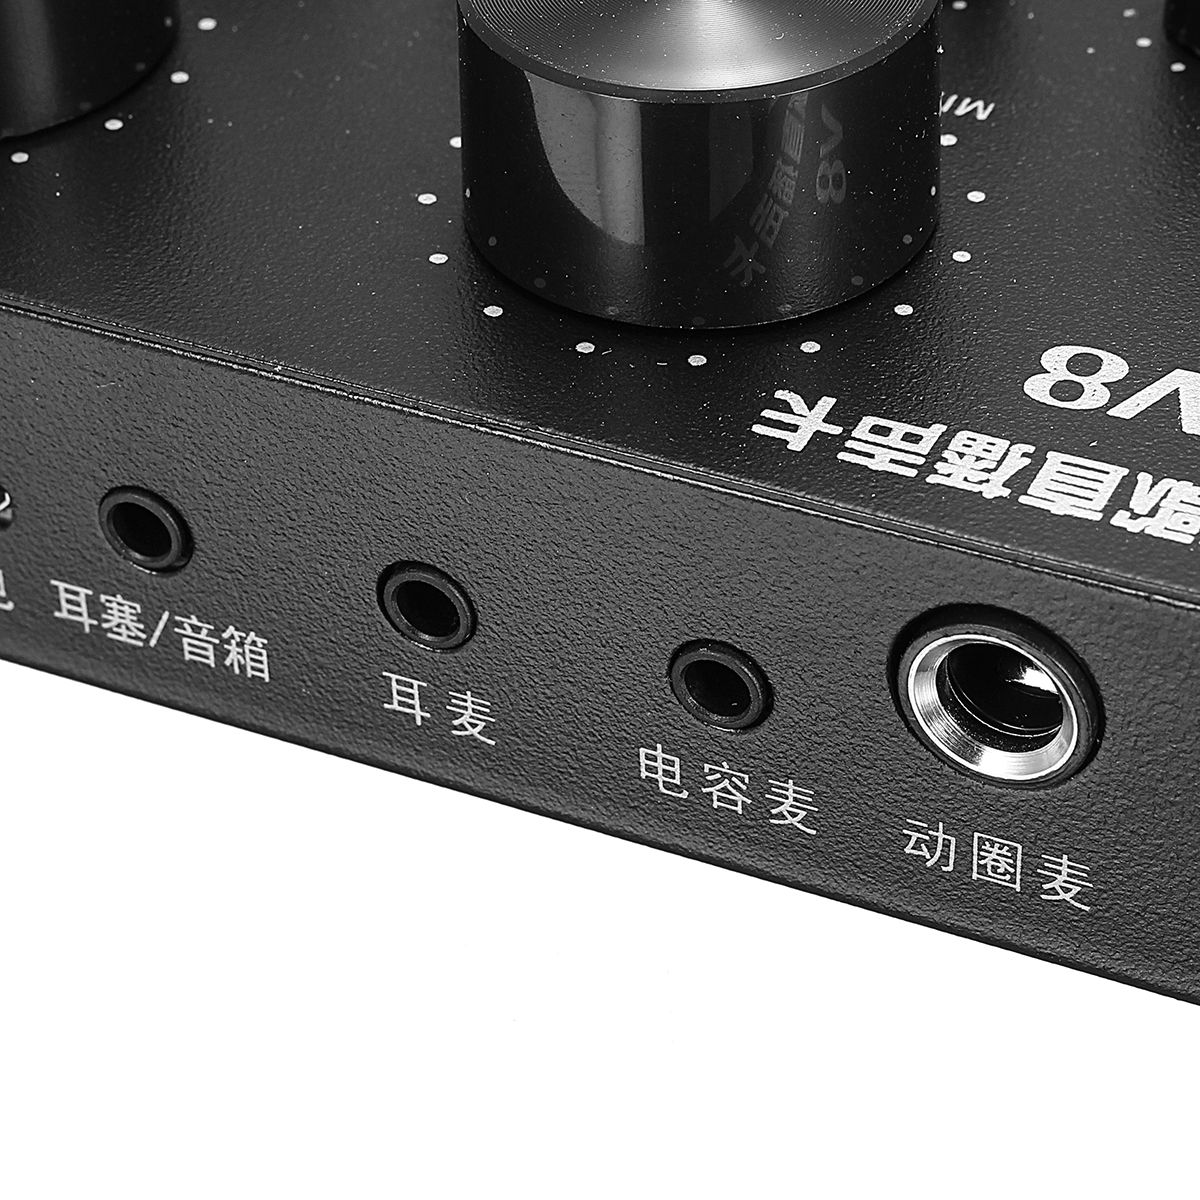 V8-Noise-Reduction-12-Sound-Effect-Audio-Mixing-Mixer-Console-Sound-Card-1422910